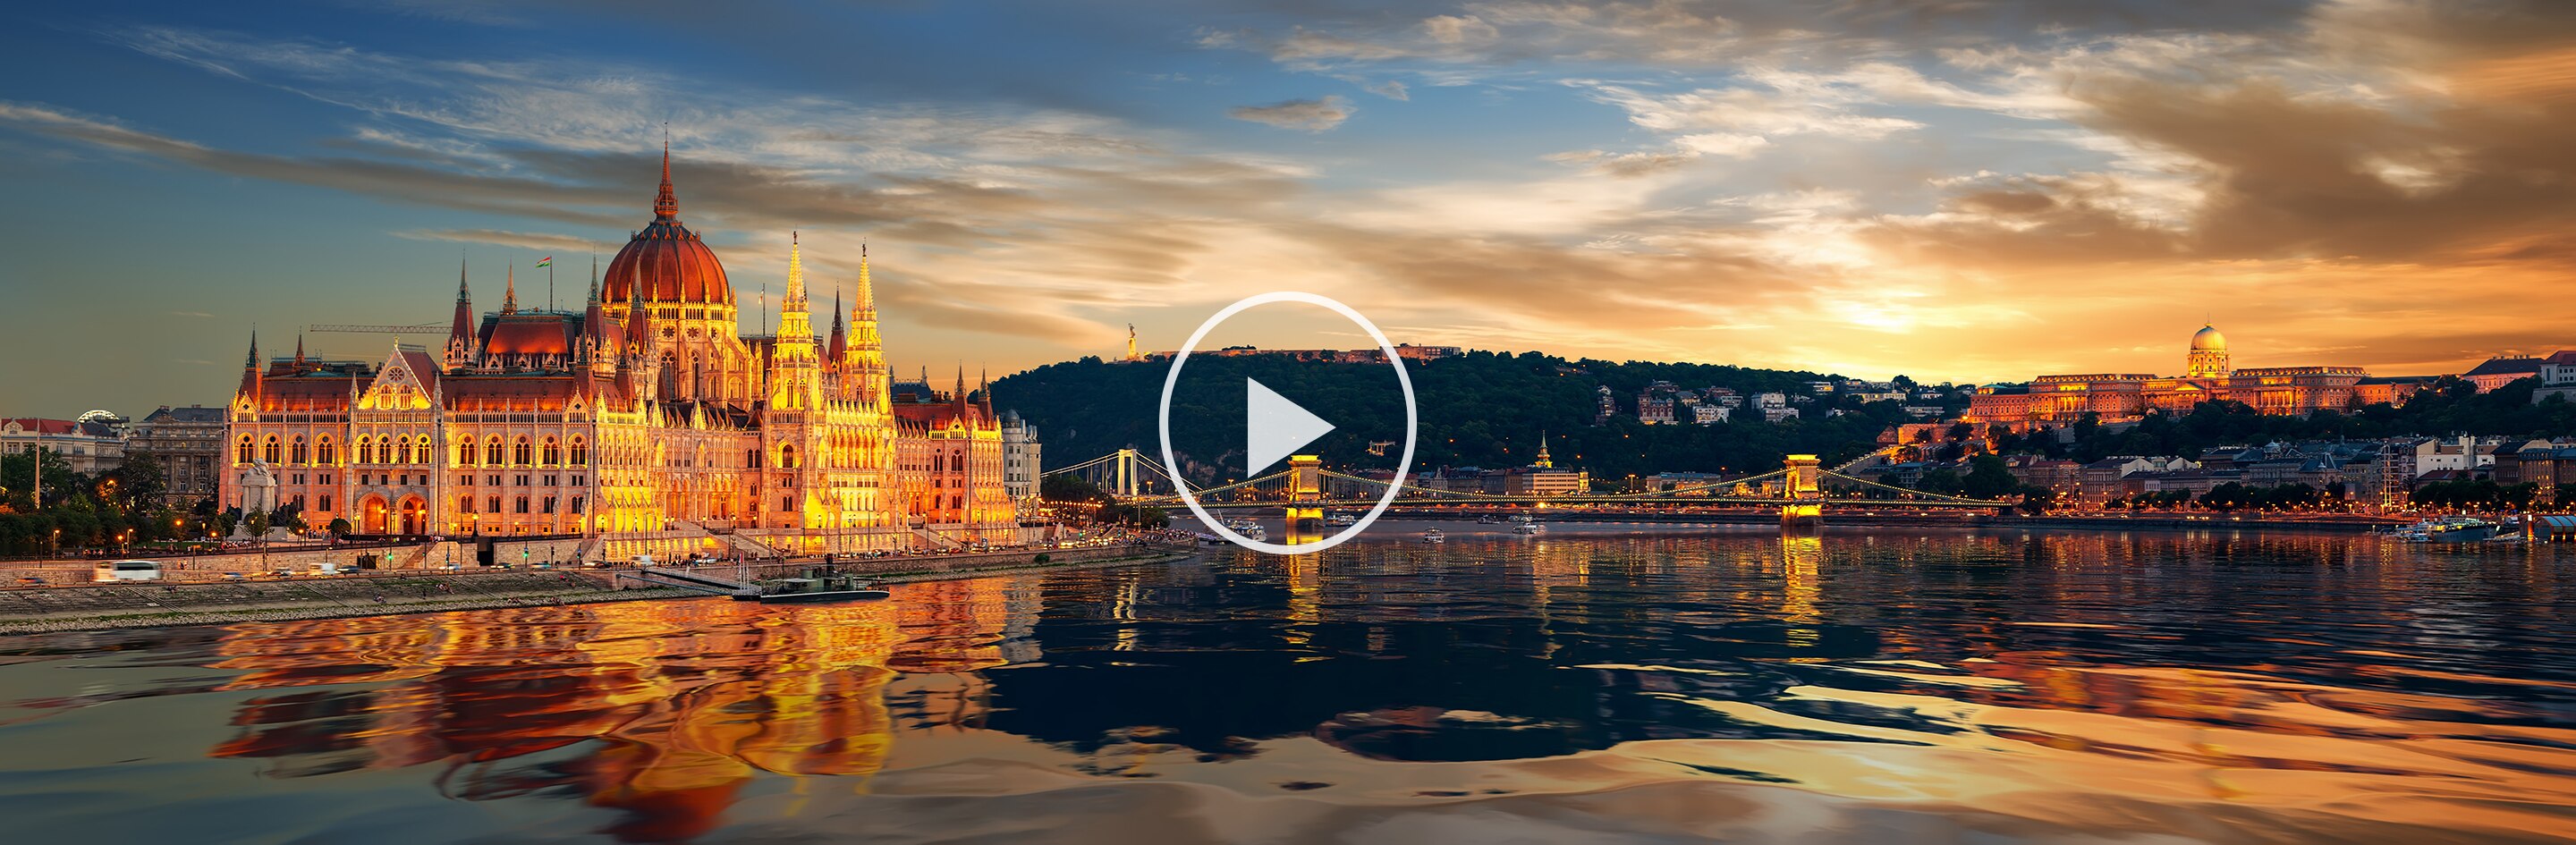 Sip & Sail Cocktail Hour: The Danube Awaits - Exciting New Reasons to Sail - Youtube